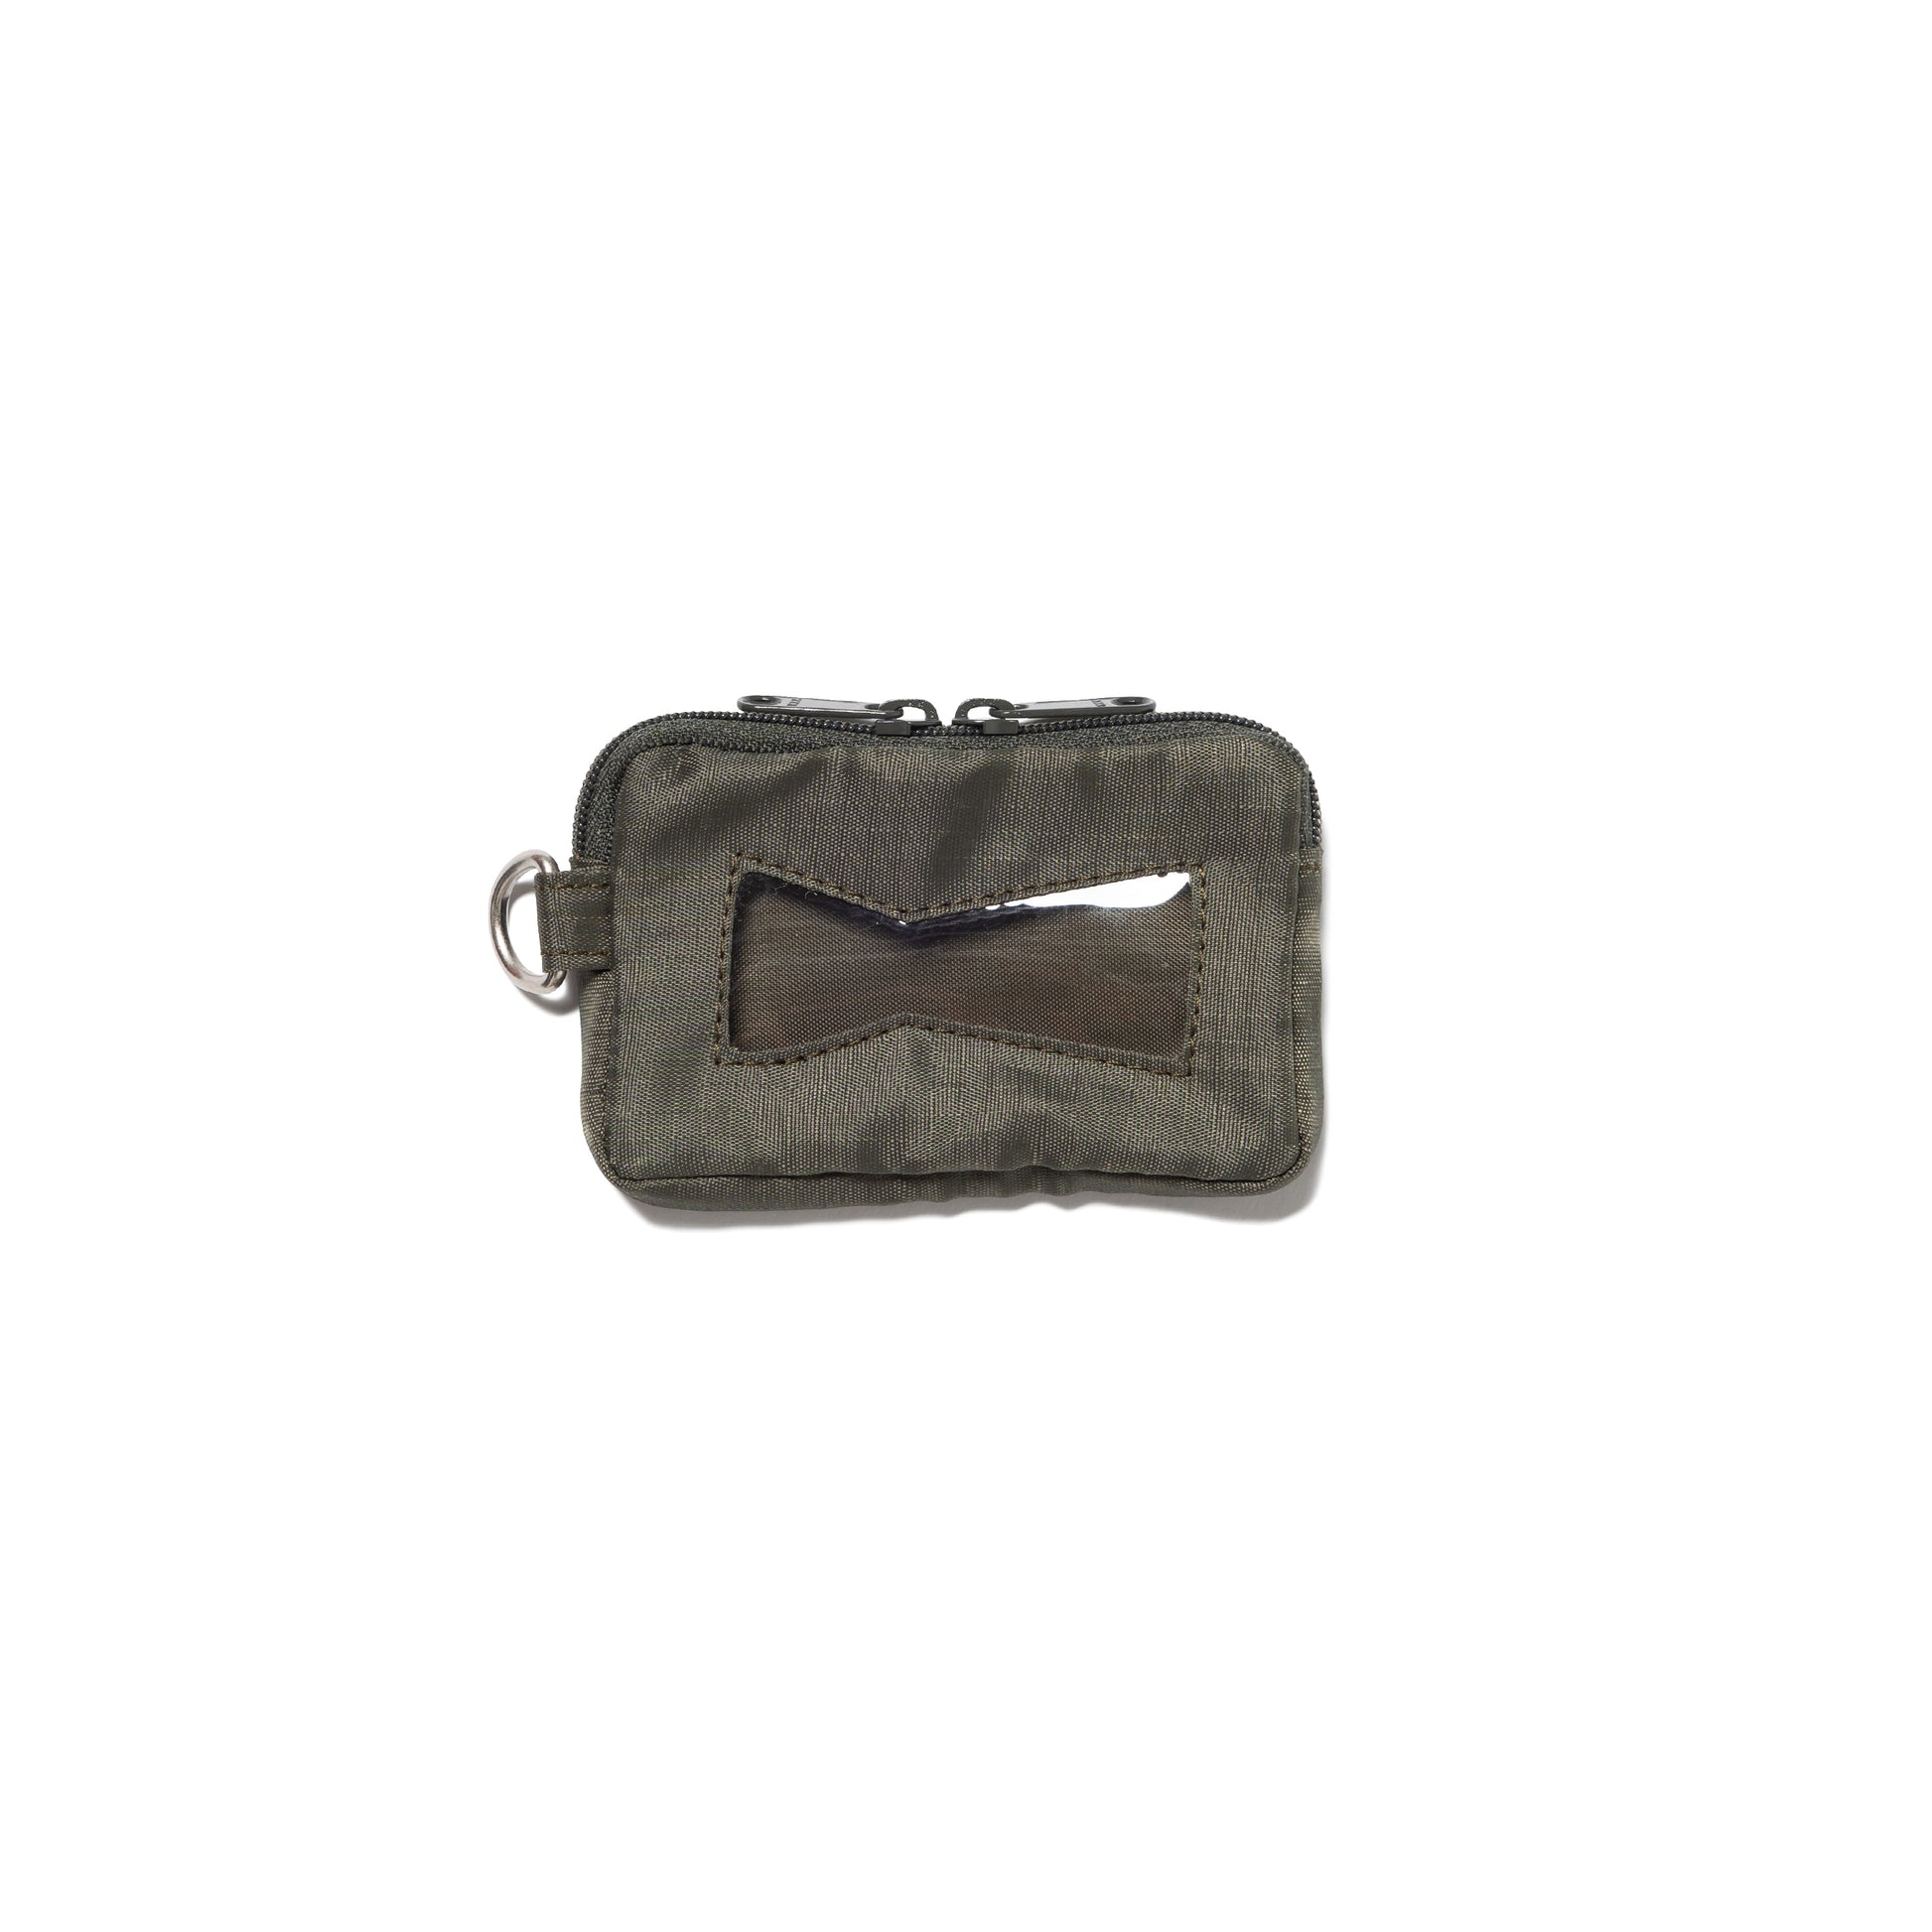 Wasted youth TRAVEL CASE MINI OD-B